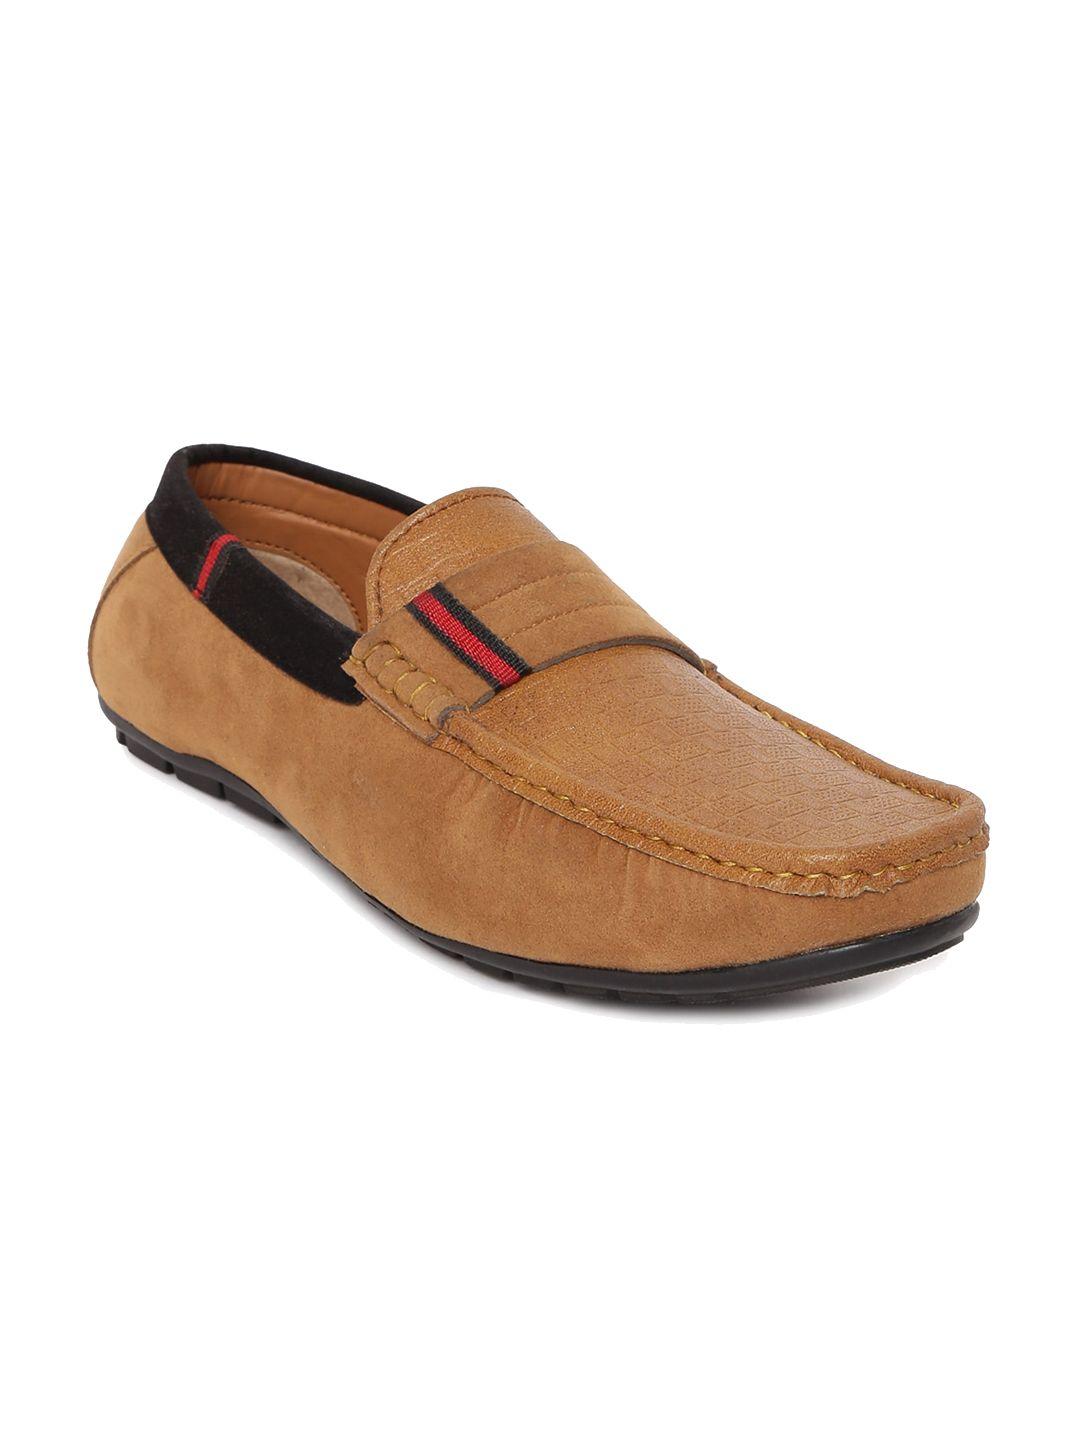 paragon-tan-loafers